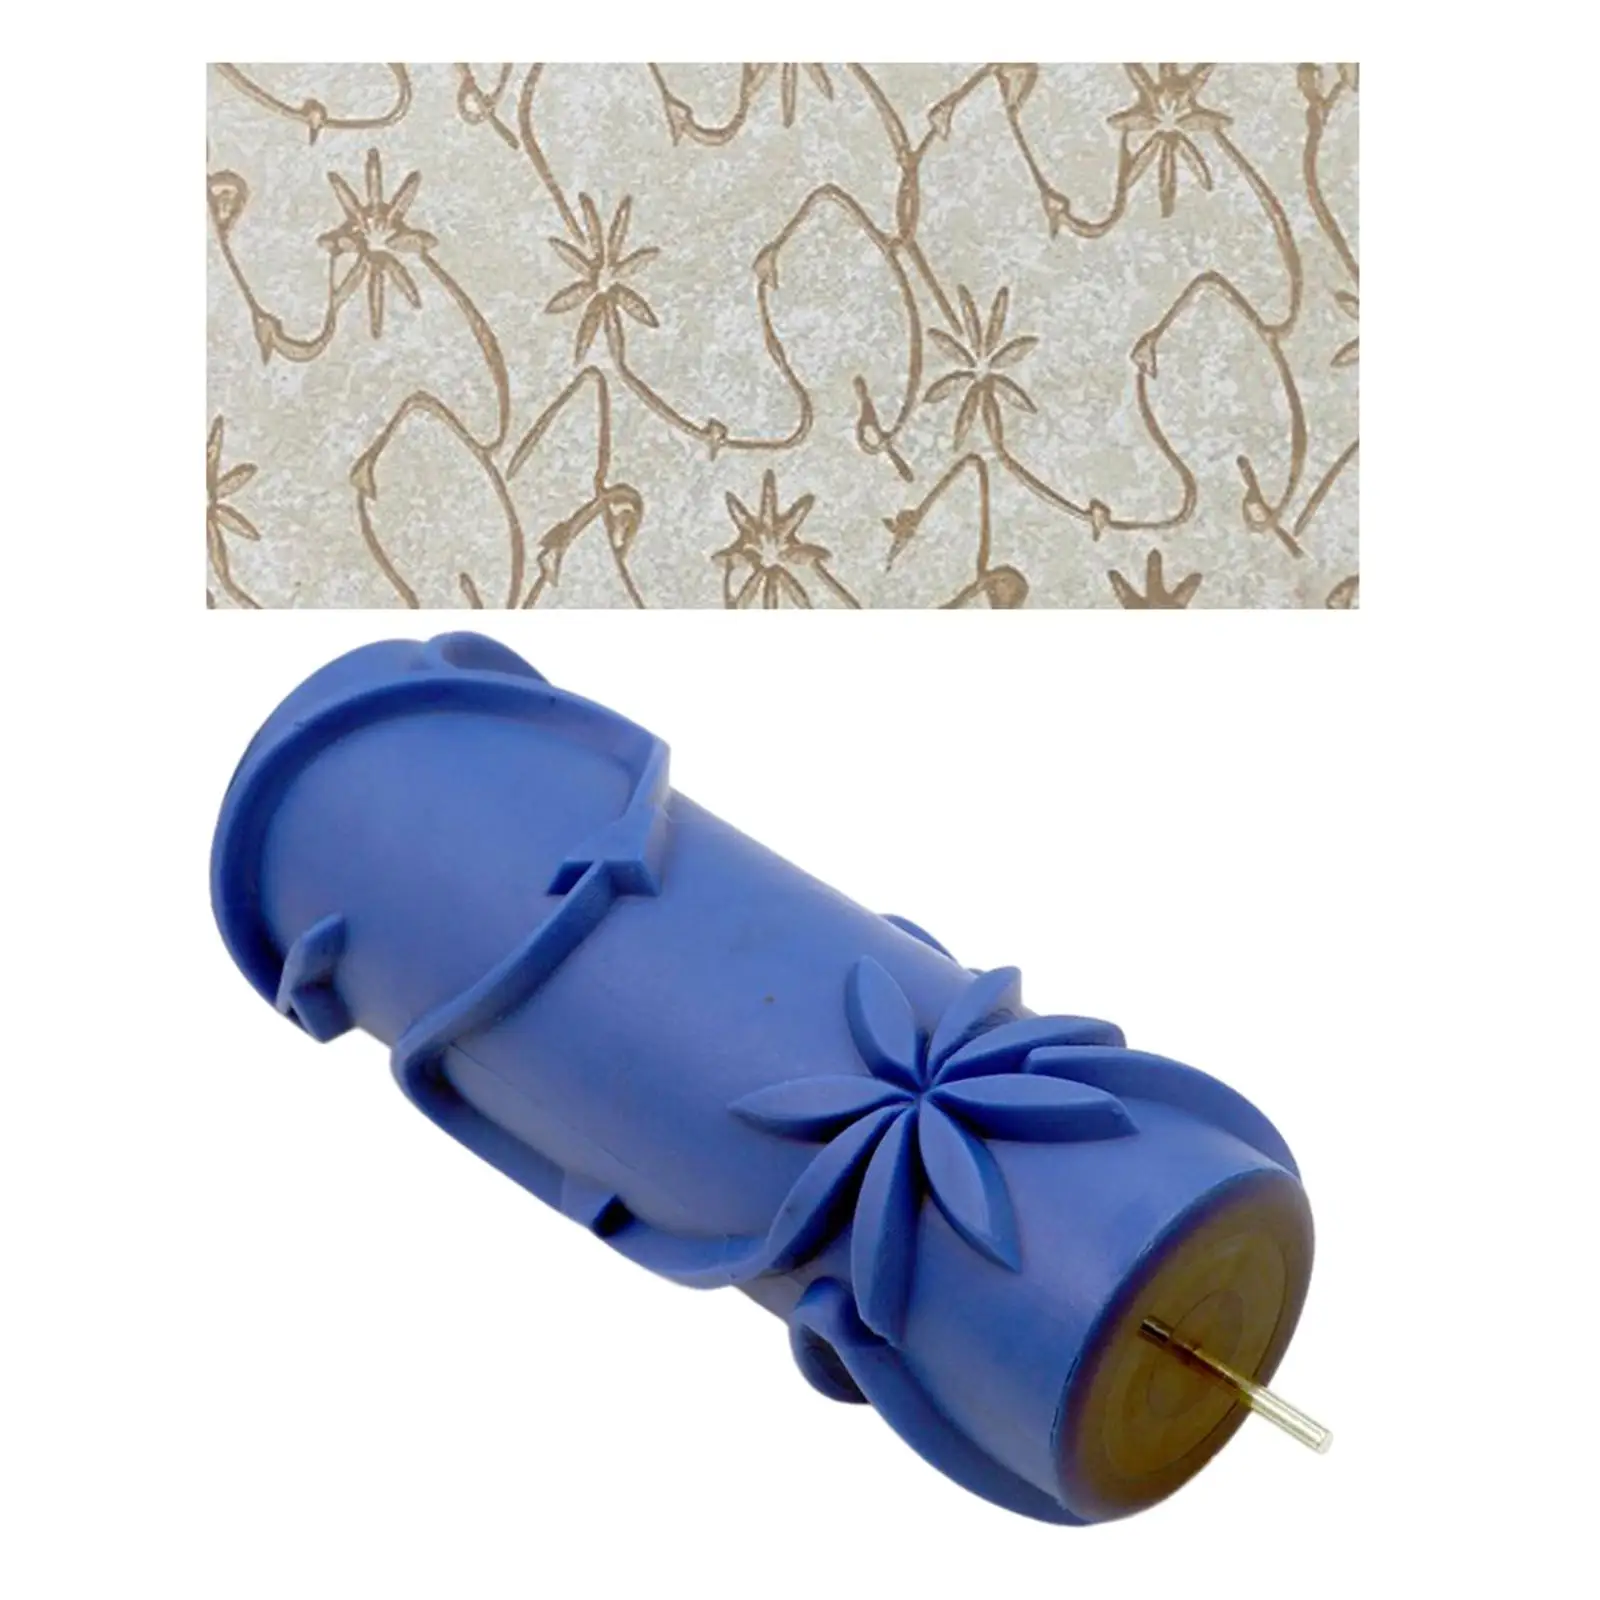 5inch Decorative Texture Roller, for Wall Tables, Curtains, Barrels DIY Home